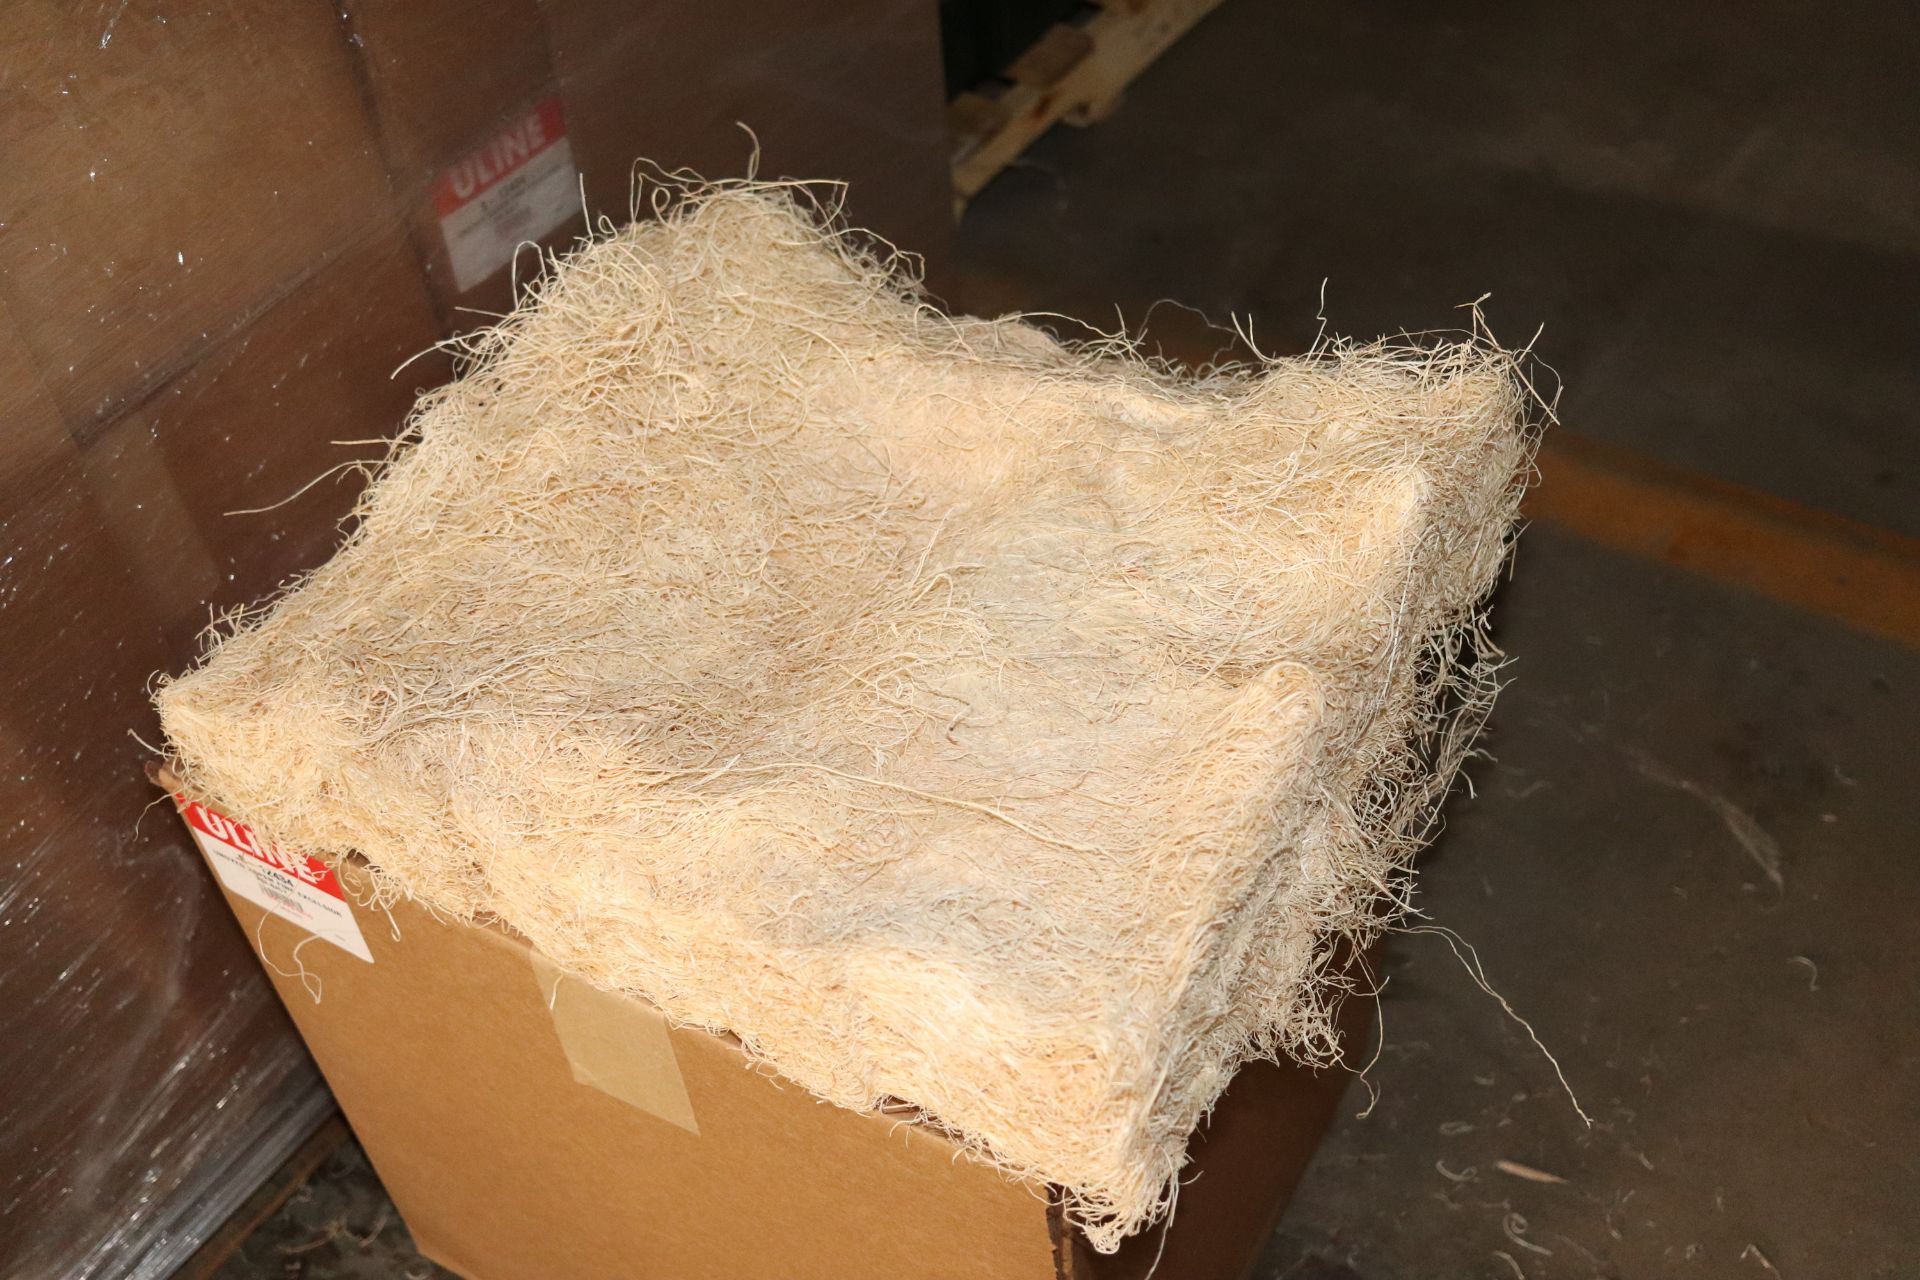 Pallet of twenty-four cartons of undyed Aspen Fine Excelsior packing material, model S-12434 - Image 2 of 3